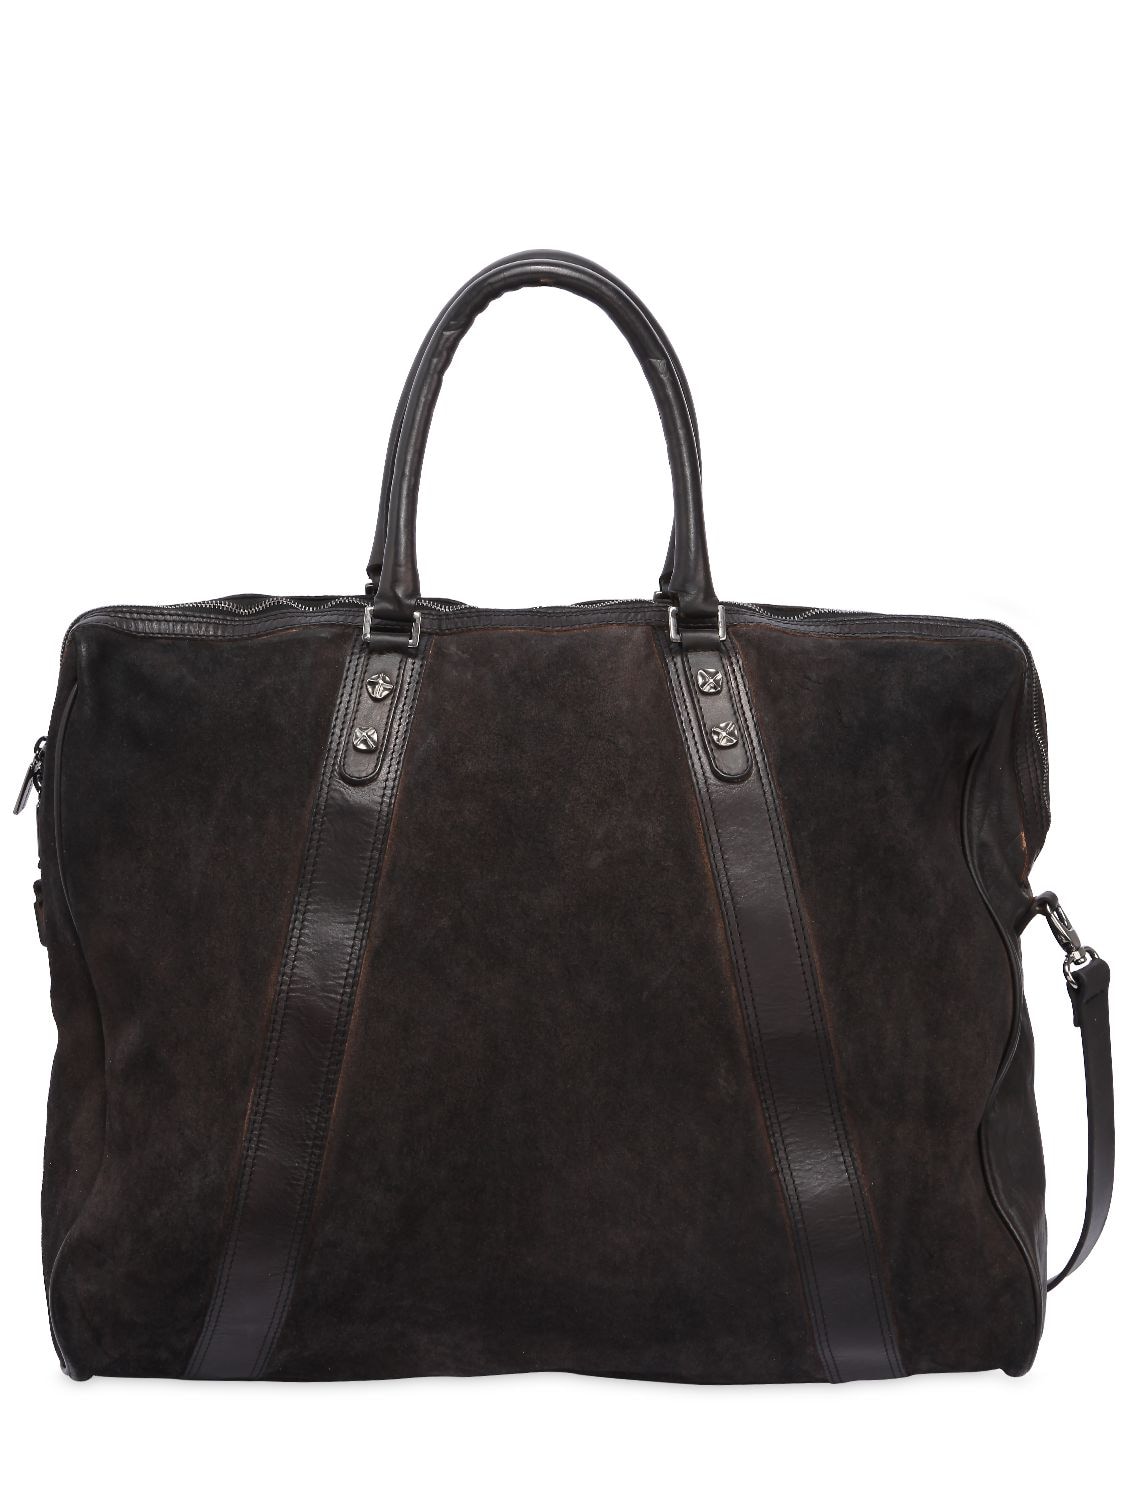 Numero 10 Leather Bag W/ Vintage Effect In Black